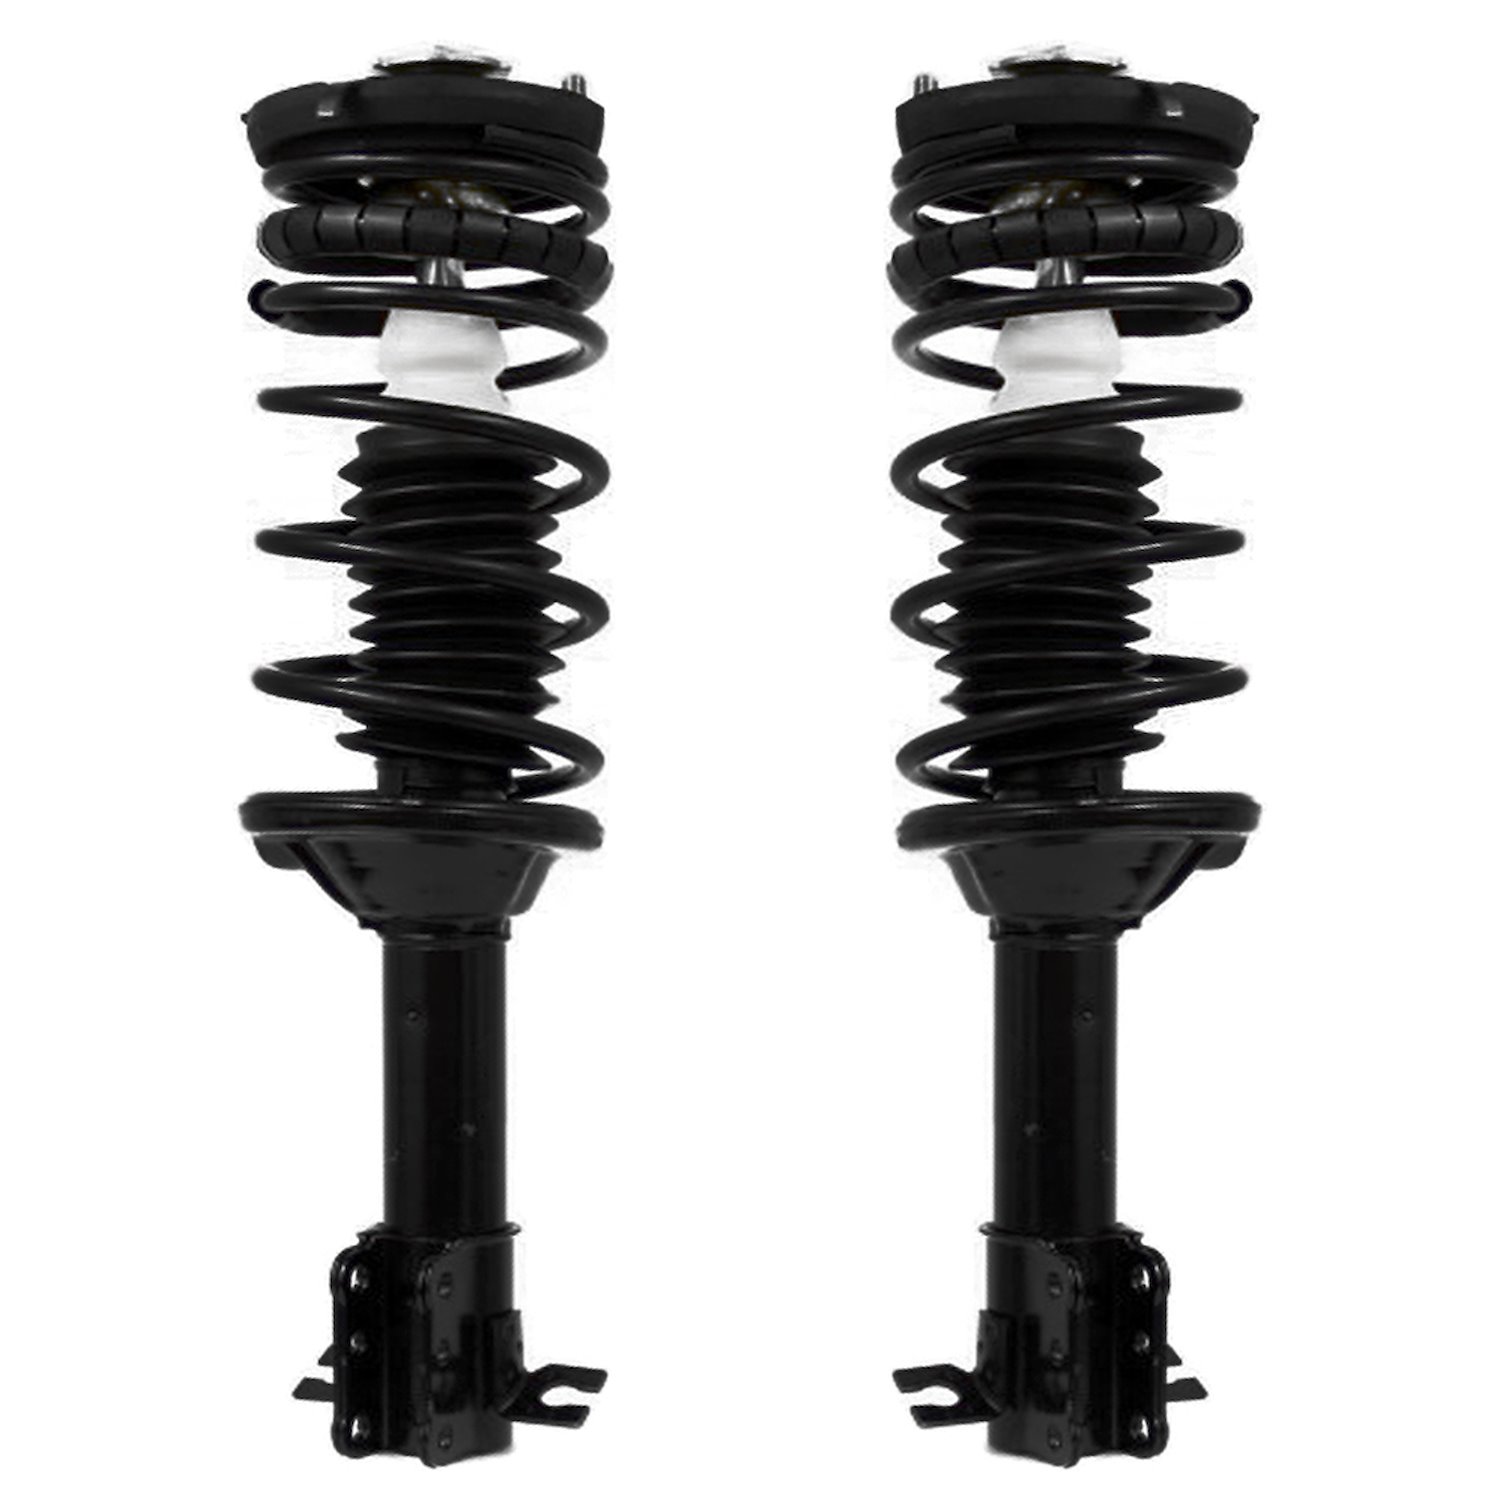 2-15010-001 Suspension Strut & Coil Spring Assembly Set Fits Select Ford Escort, Mercury Tracer